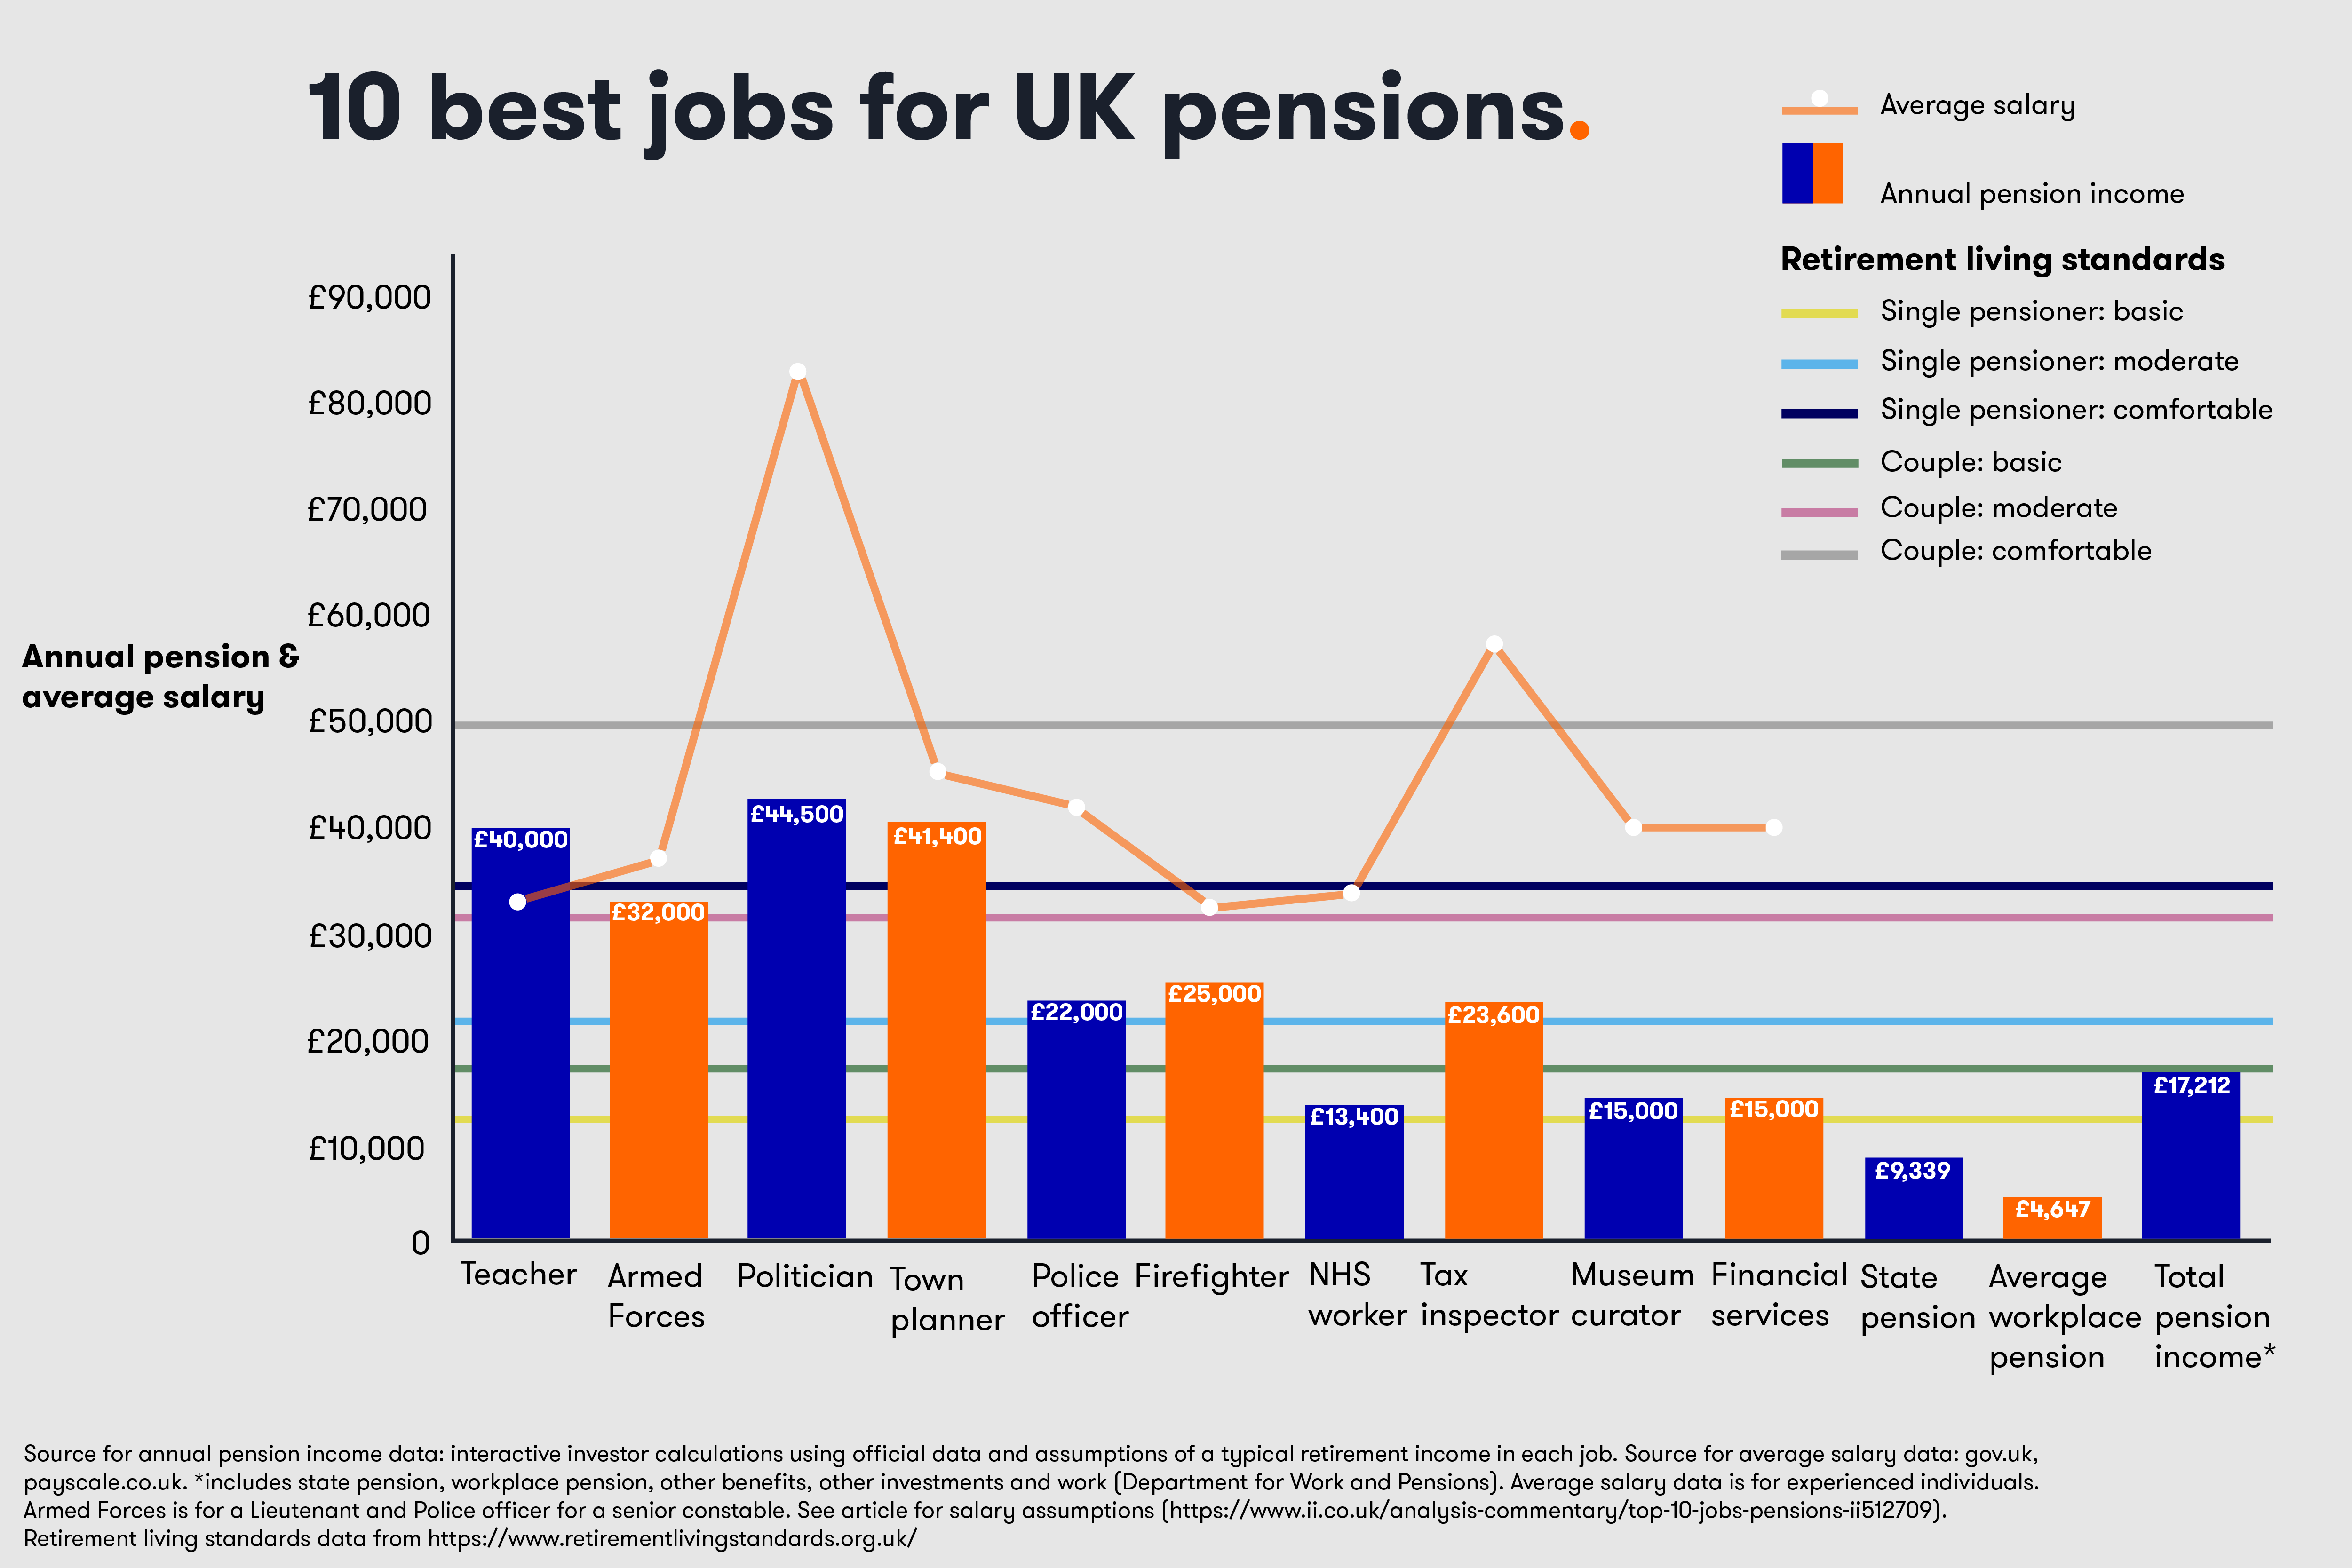 10 best jobs for UK pensions infographic